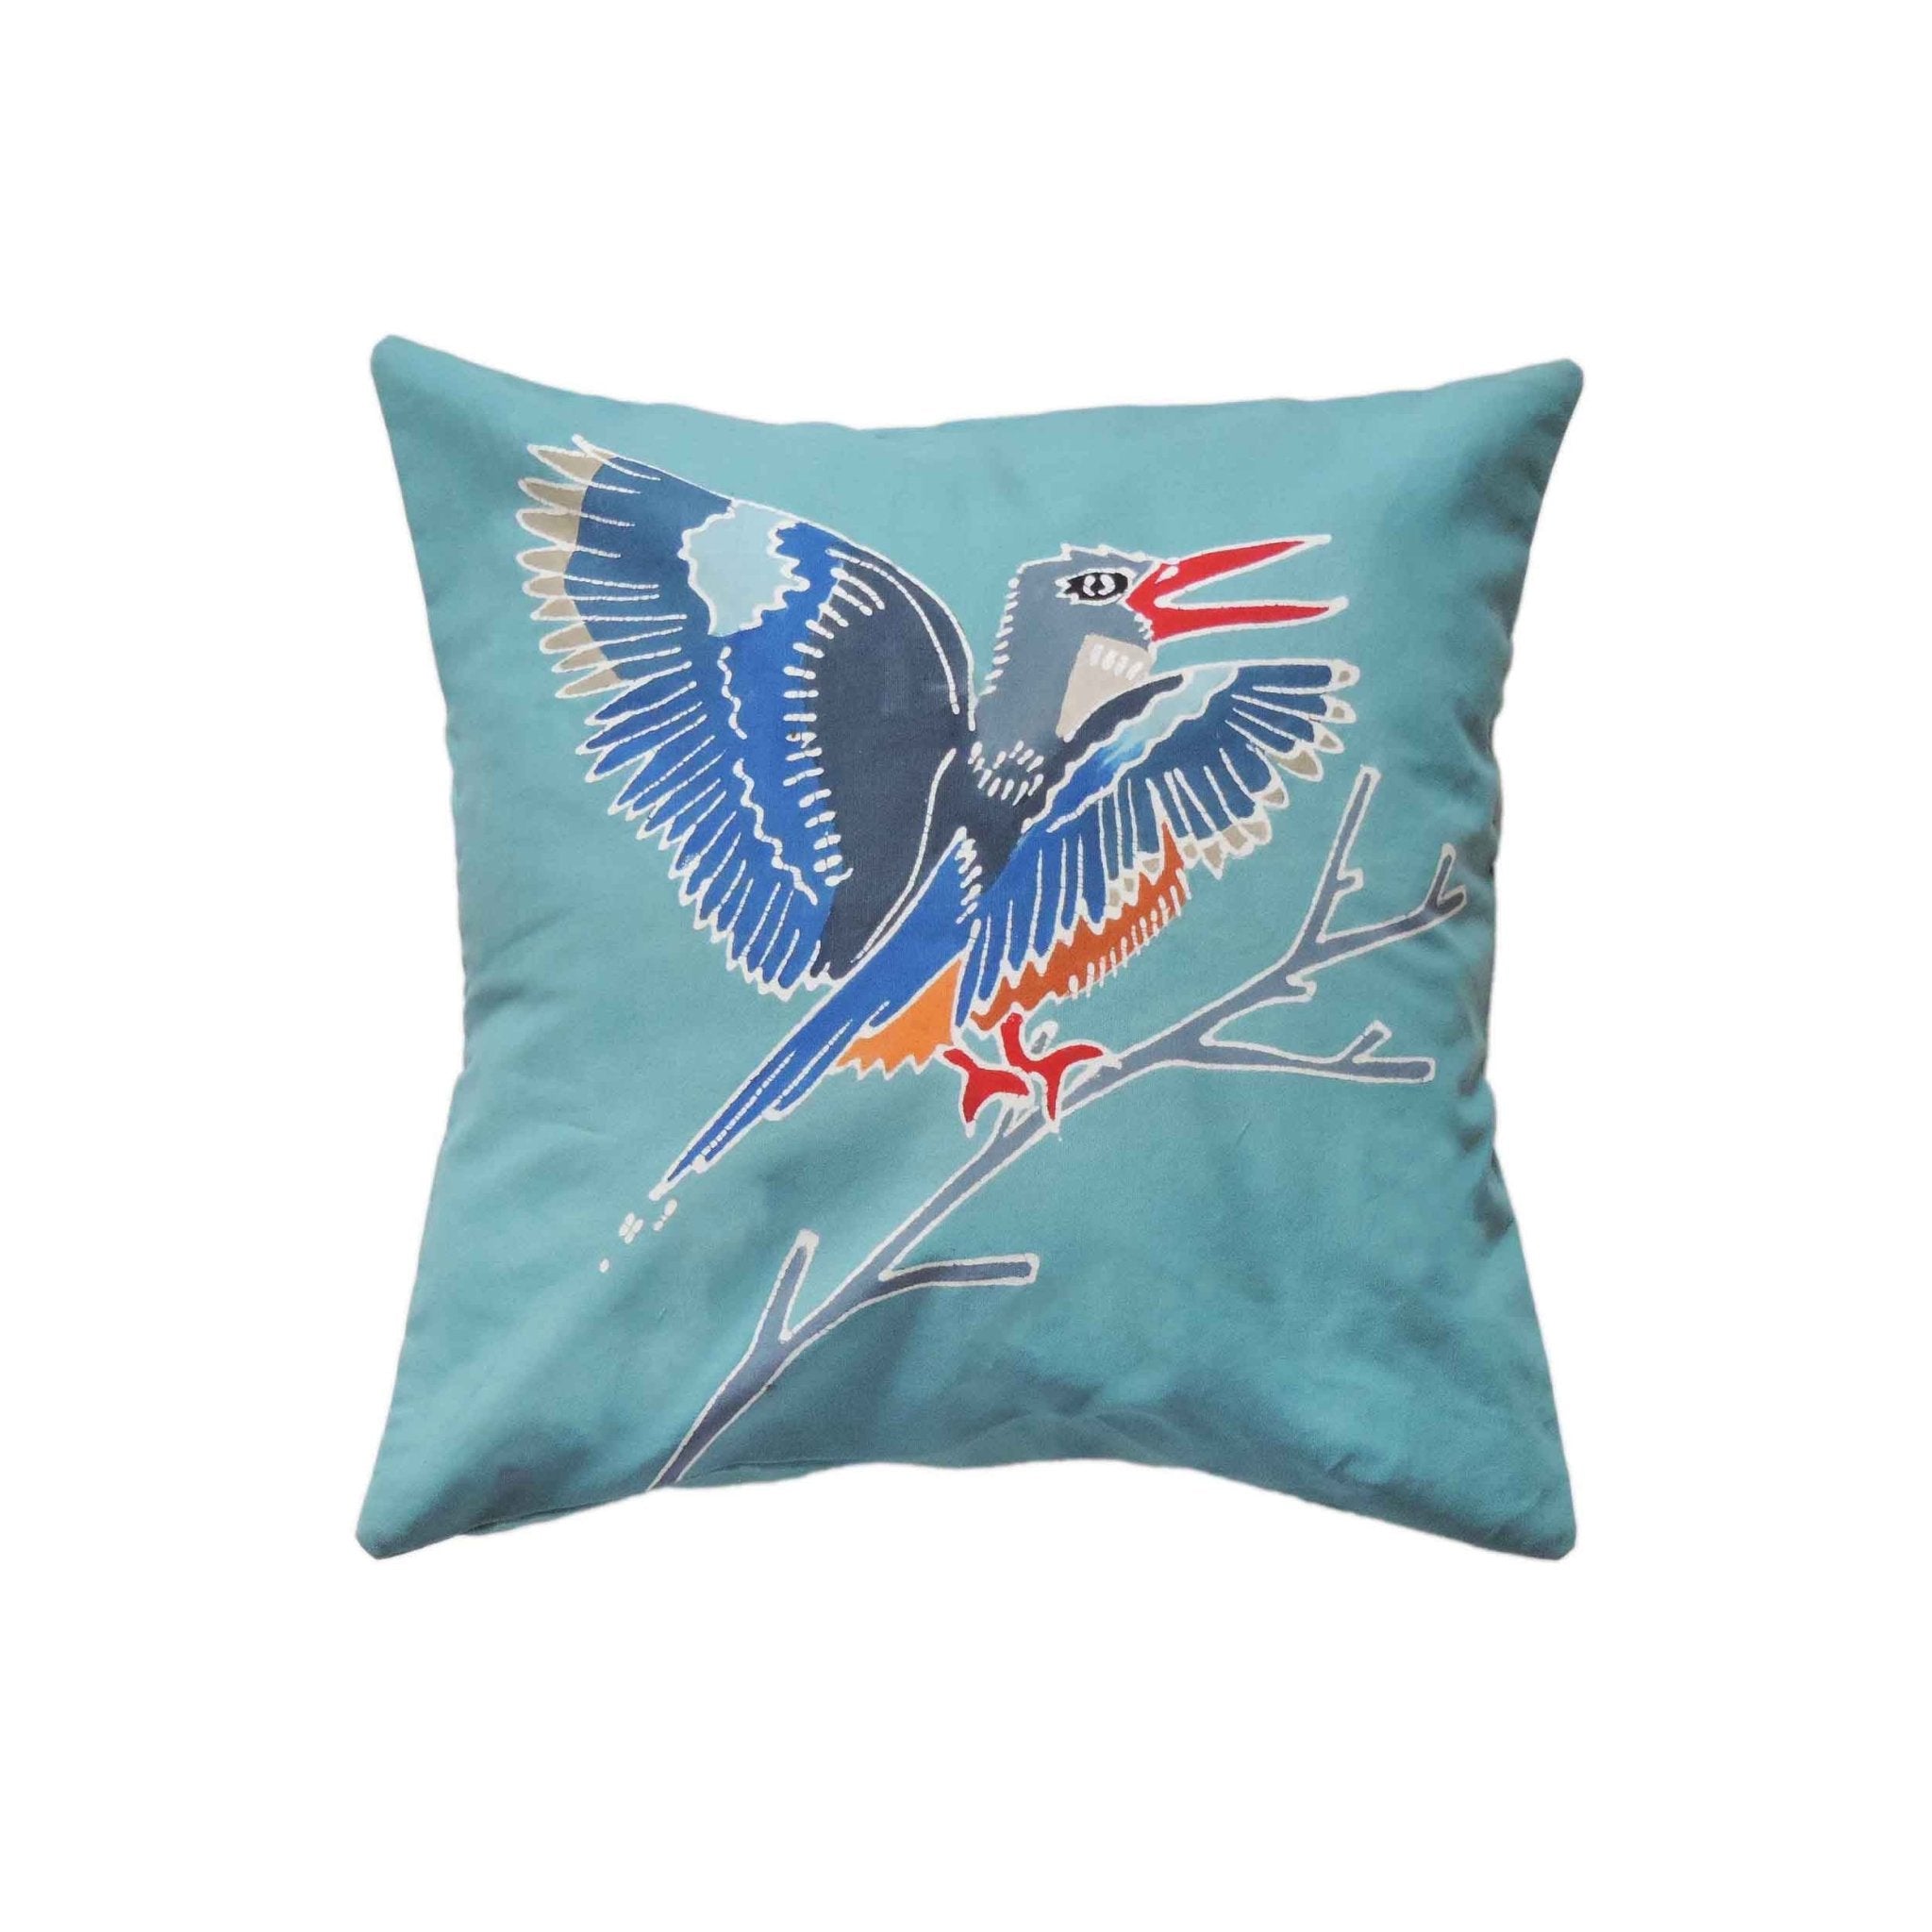 Papiko Grey Headed Kingfisher Cushion Cover - Handmade by TRIBAL TEXTILES - Handcrafted Home Decor Interiors - African Made